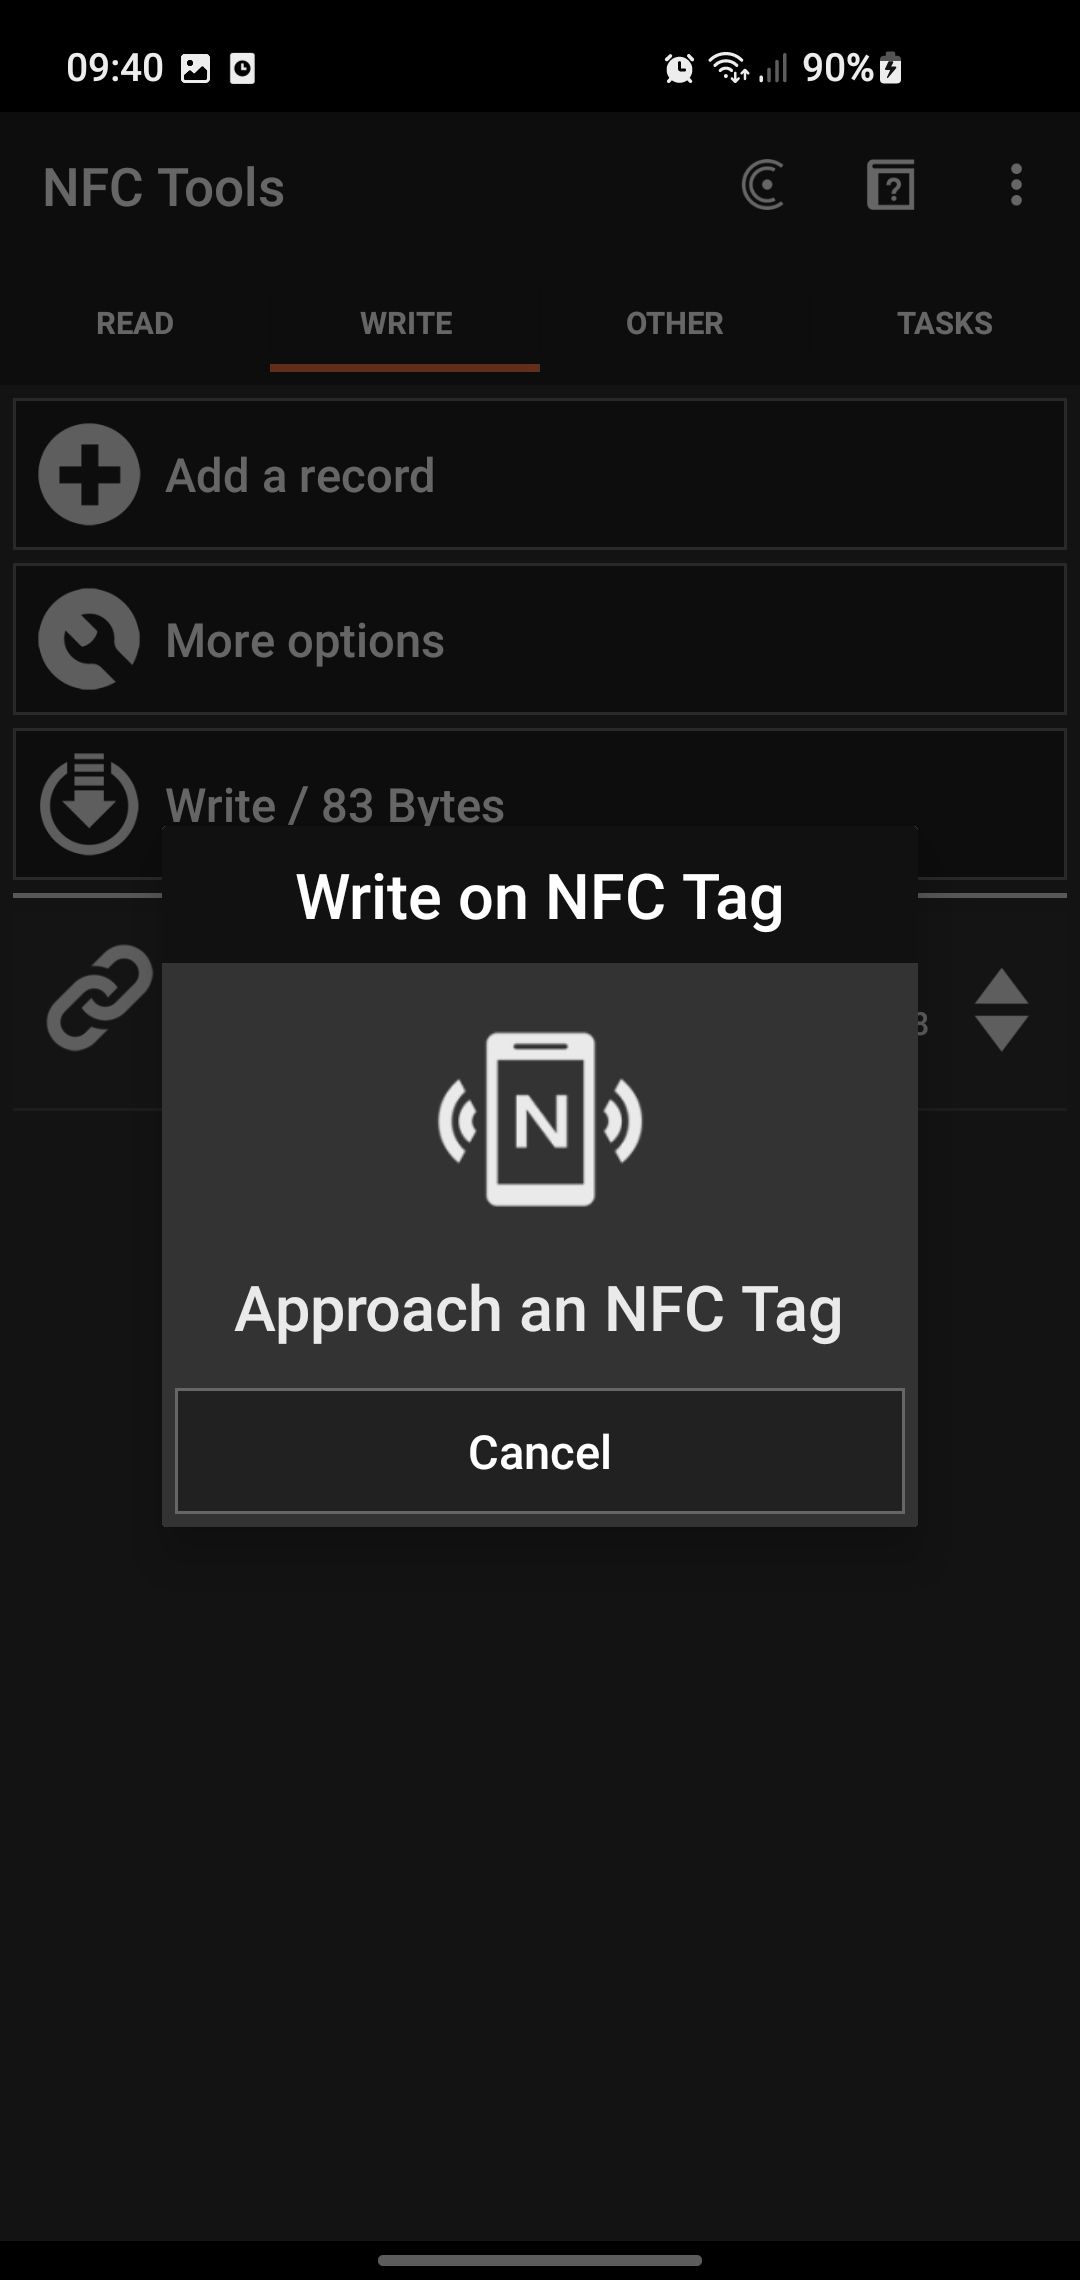 NFC tools app message to approach an NFC tag